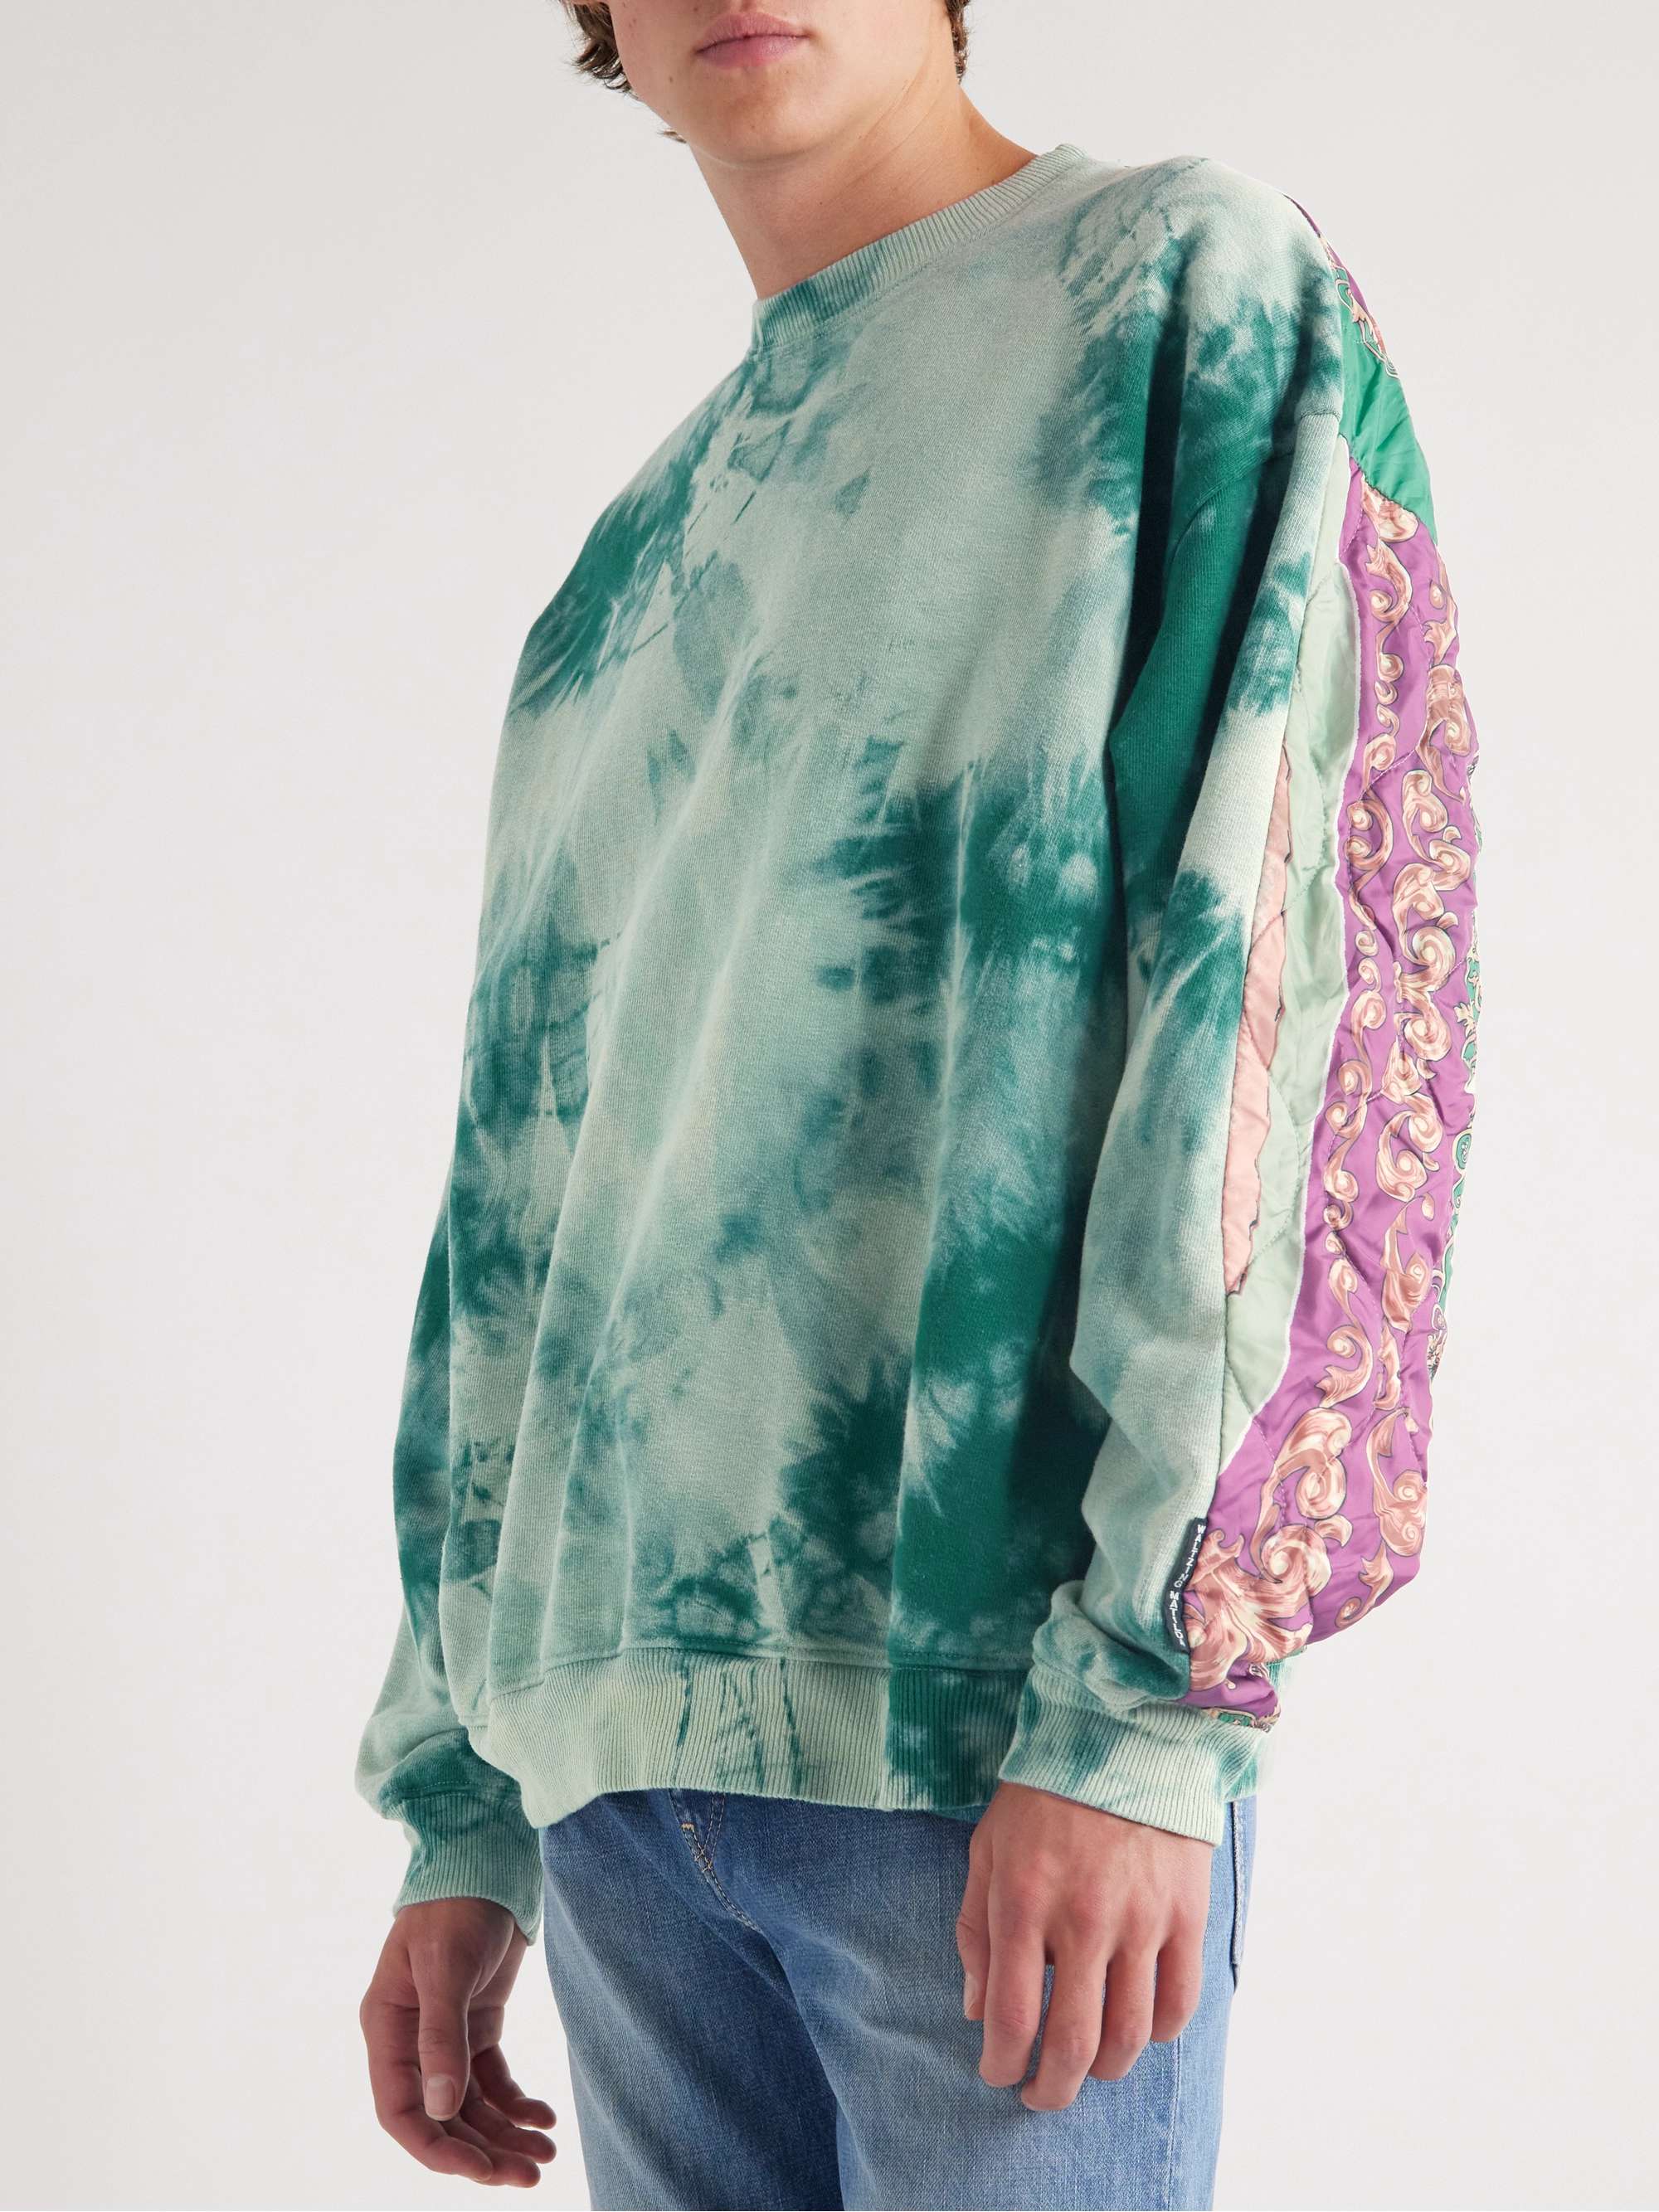 KAPITAL Tie-Dyed Cotton-Jersey and Printed Quilted Shell Sweatshirt